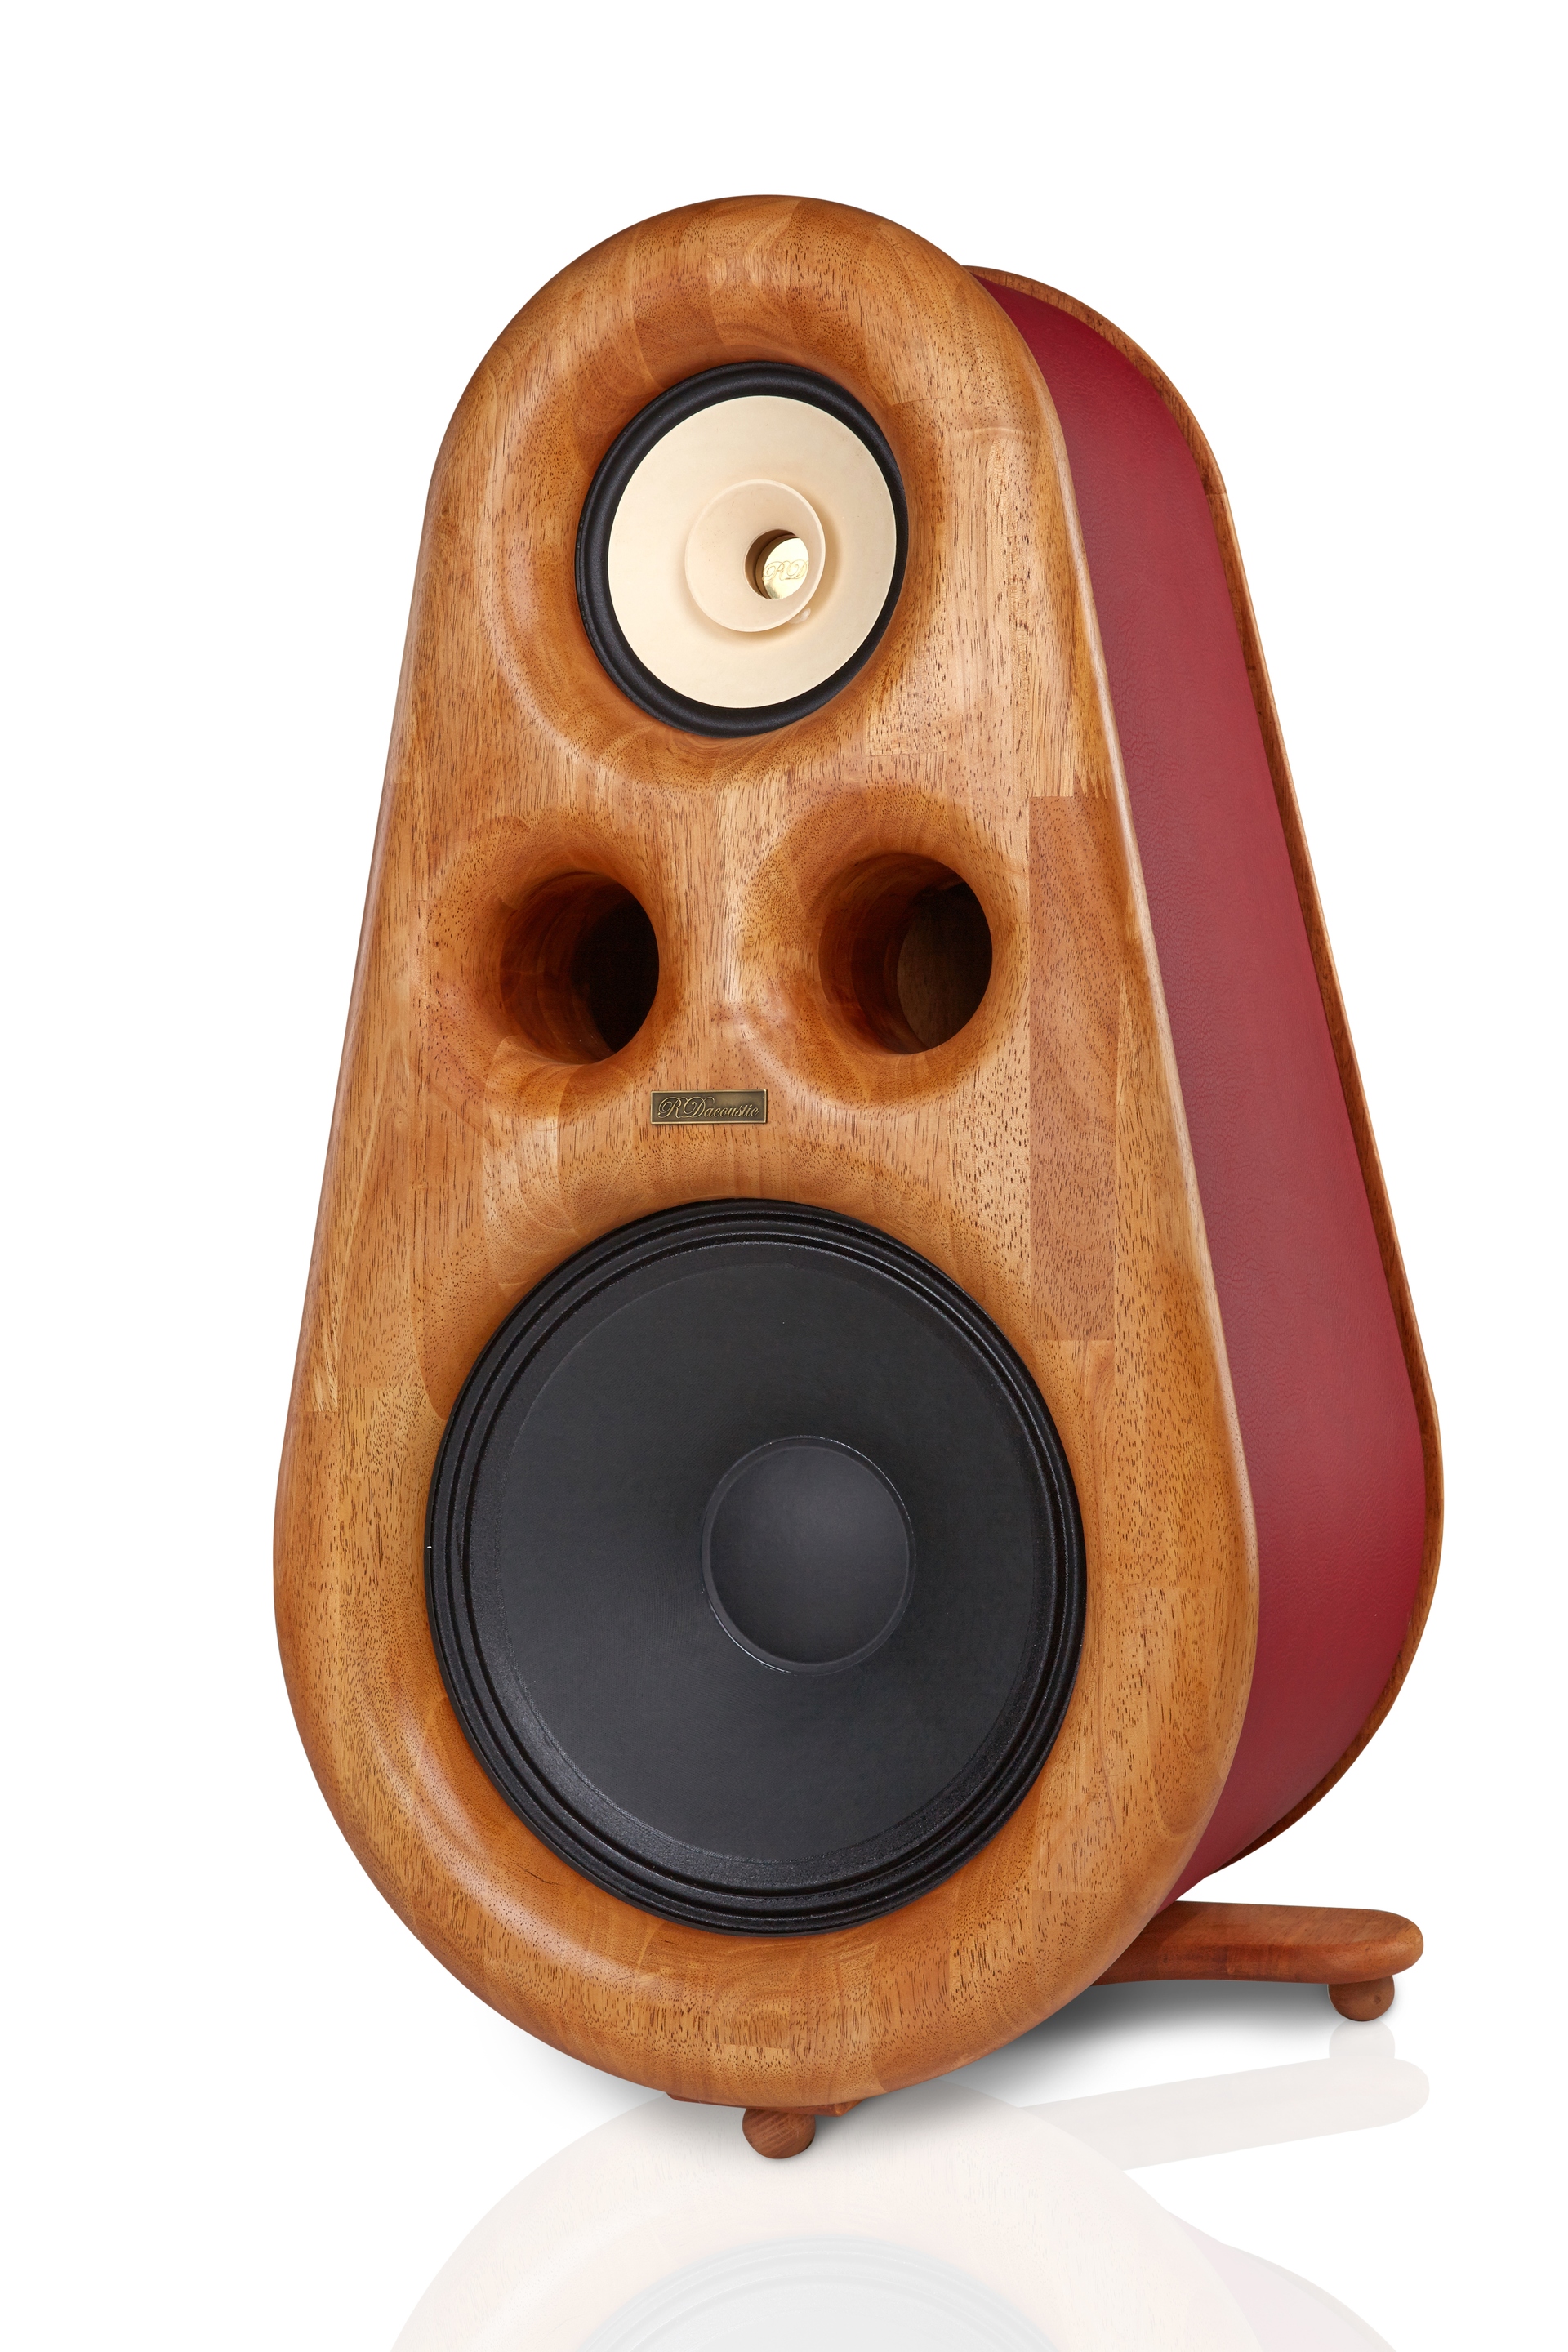 http://www.rdacoustic.cz/wp-content/uploads/RDacoustic_Speakers_Euphoria_Right_Small.jpg